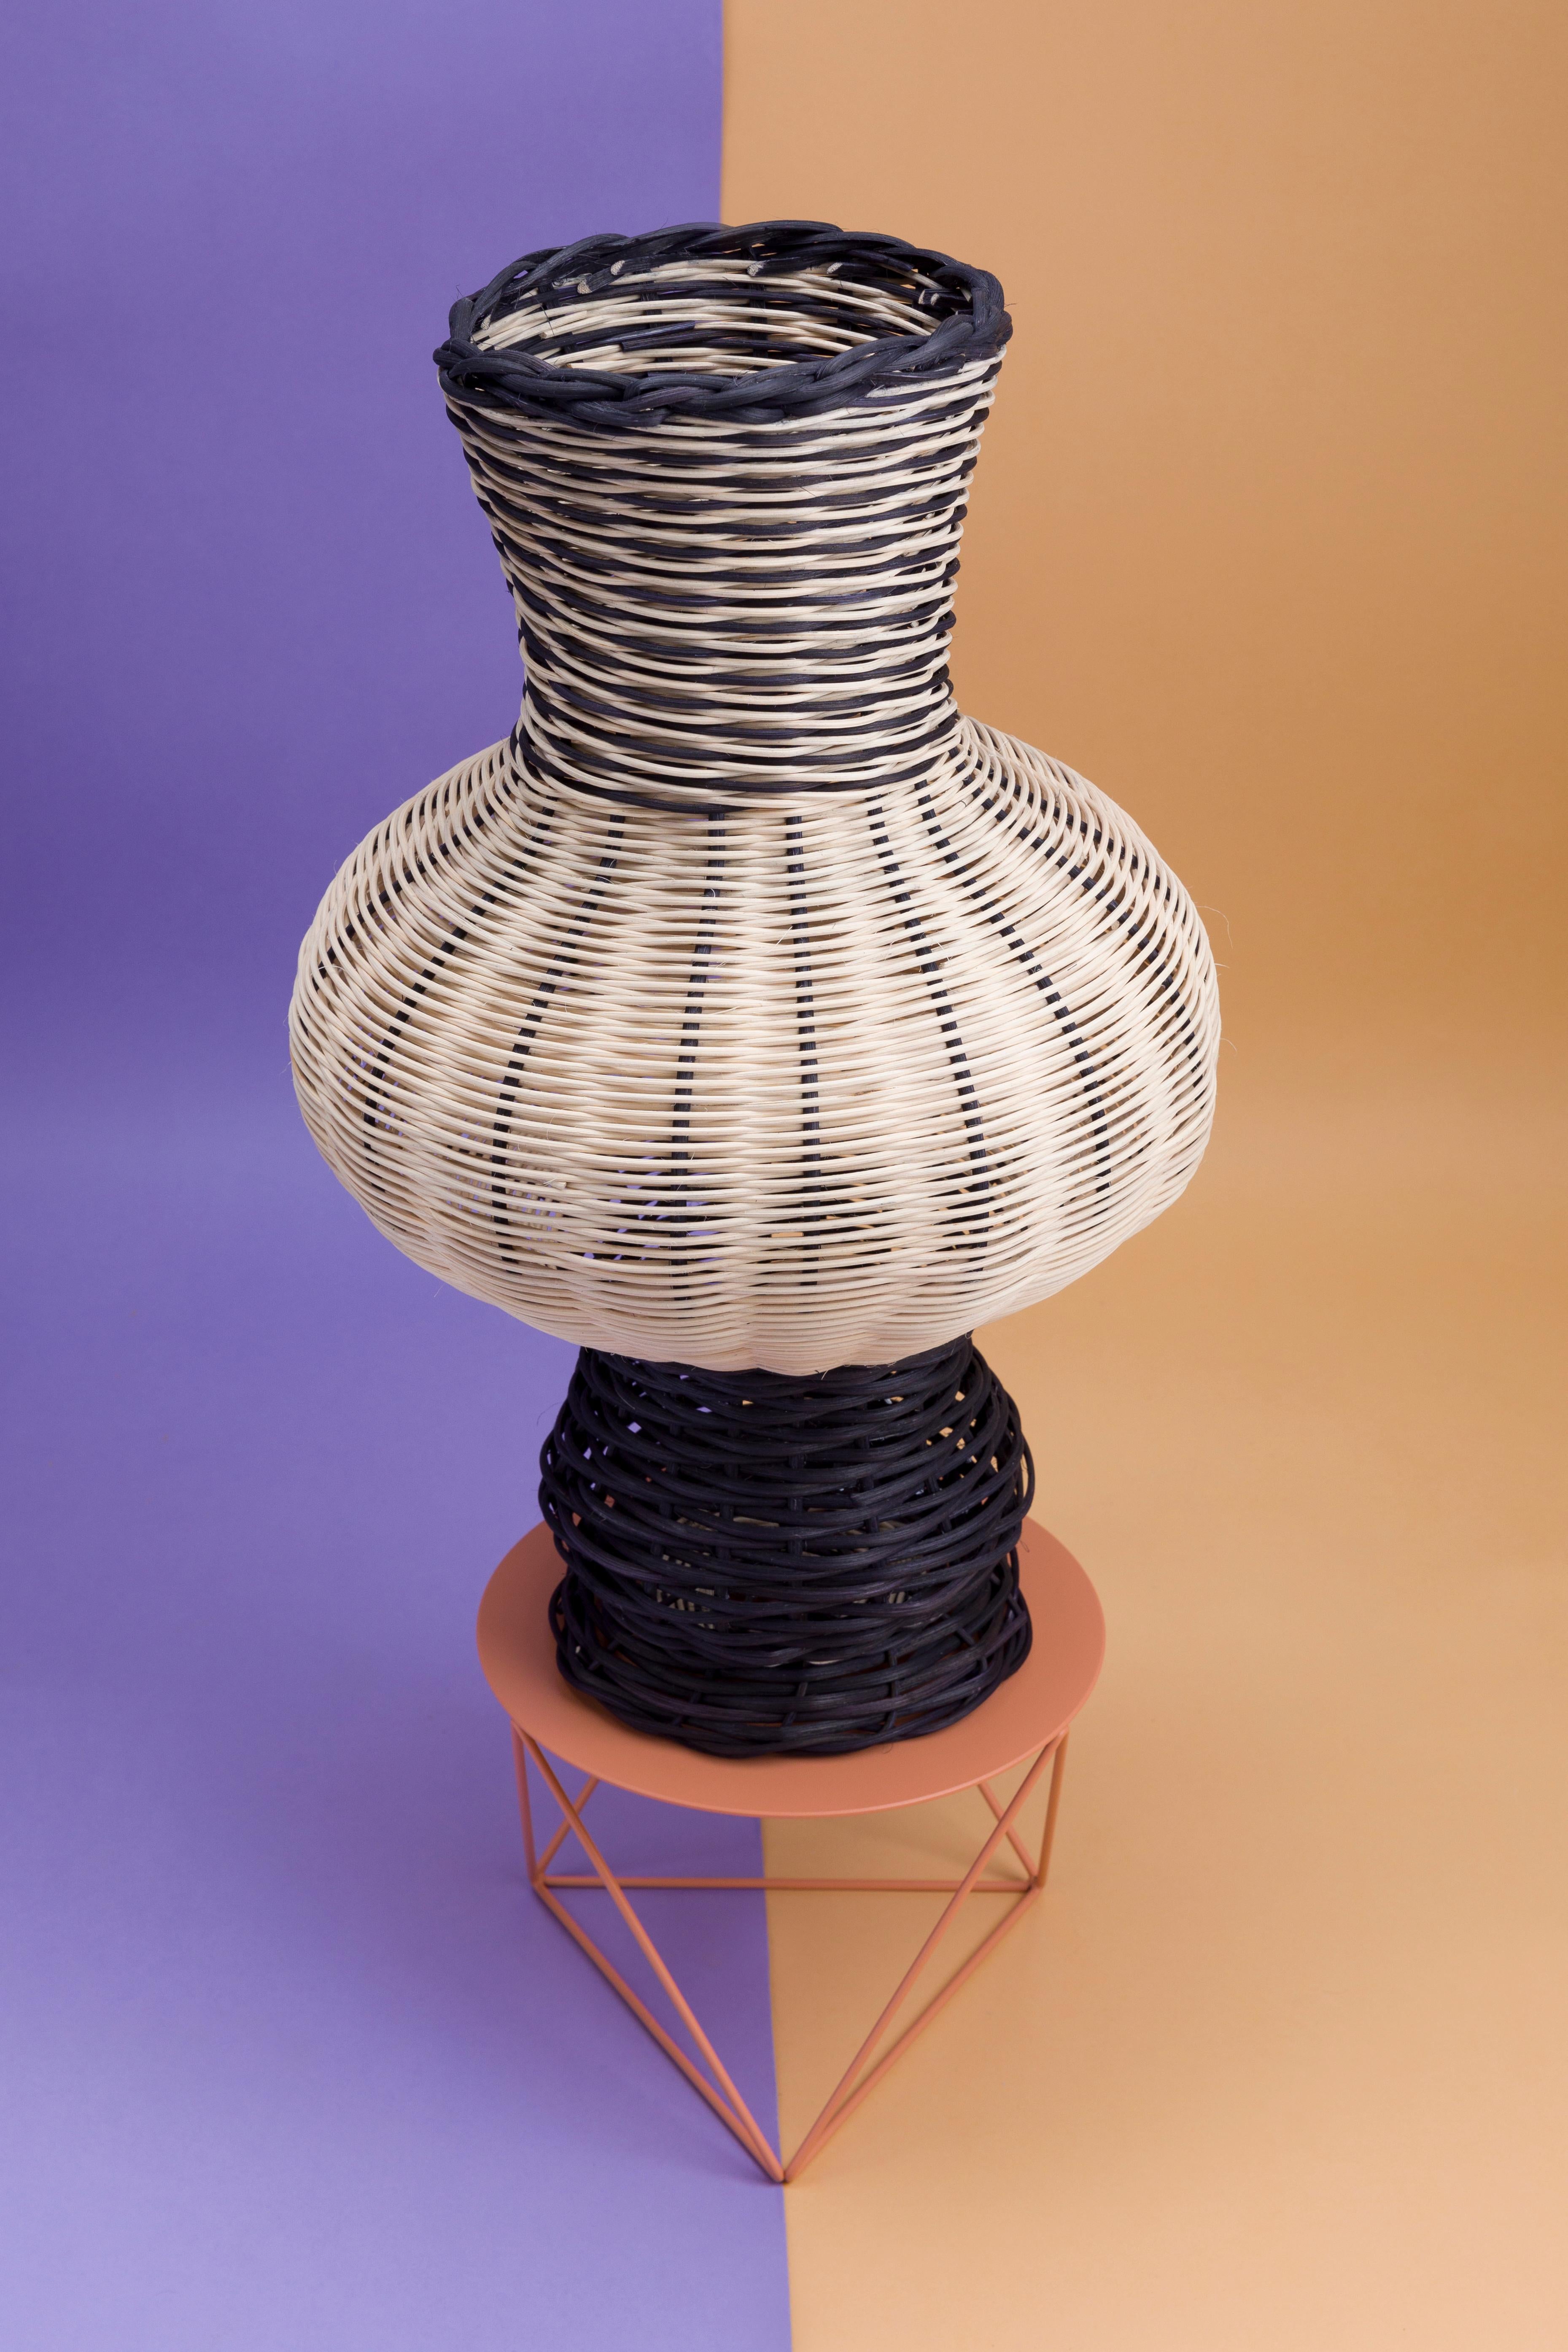 The Moira Vase is a one-of-a-kind objet d’art, hand dyed and woven with reed in our Chicago studio. Inspired by forms in ancient Greek ceramics, the material language of this vessel brings together the rich craft history of weaving with 3